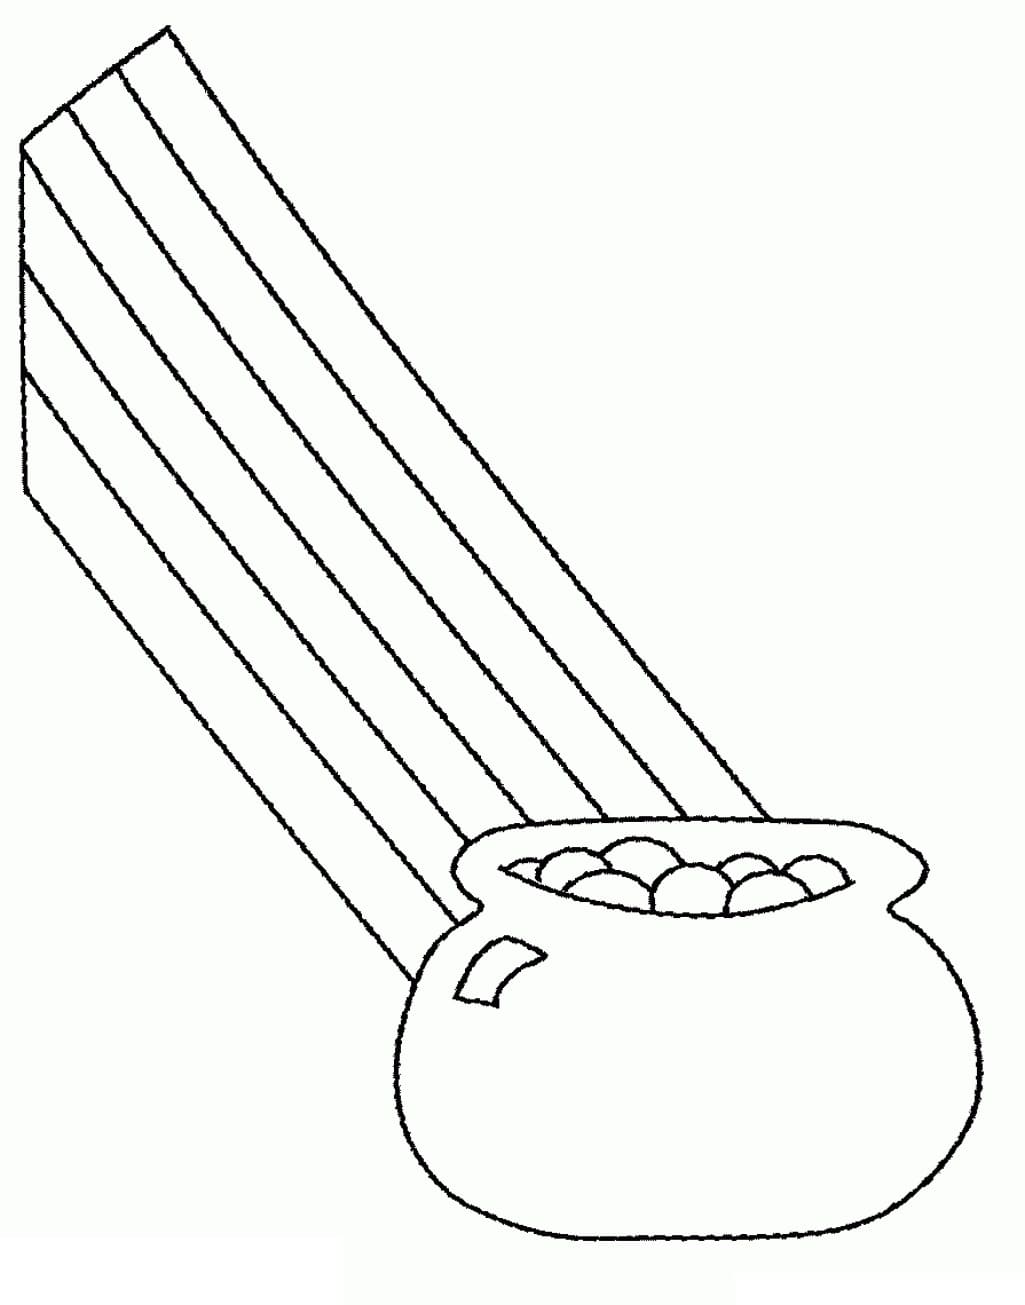 Pot of Gold 13 Coloring Page